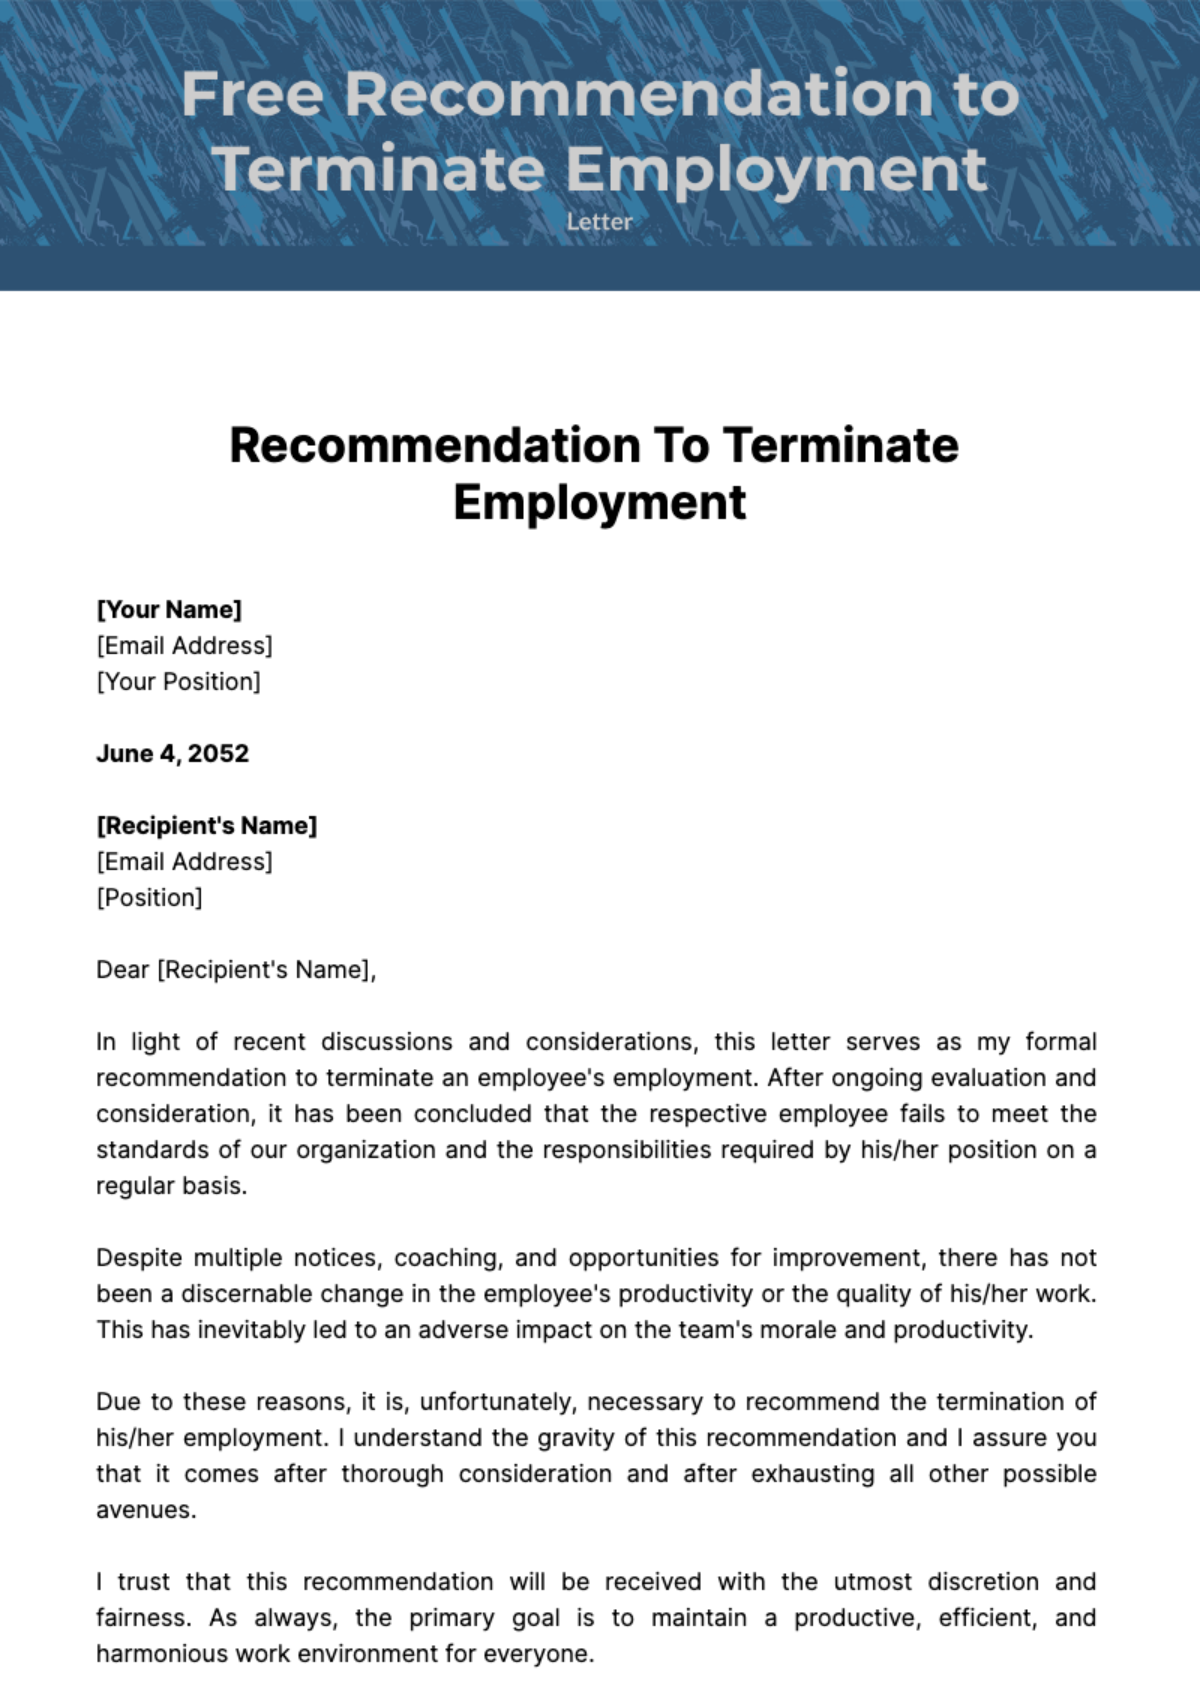 Recommendation to Terminate Employment Letter Template